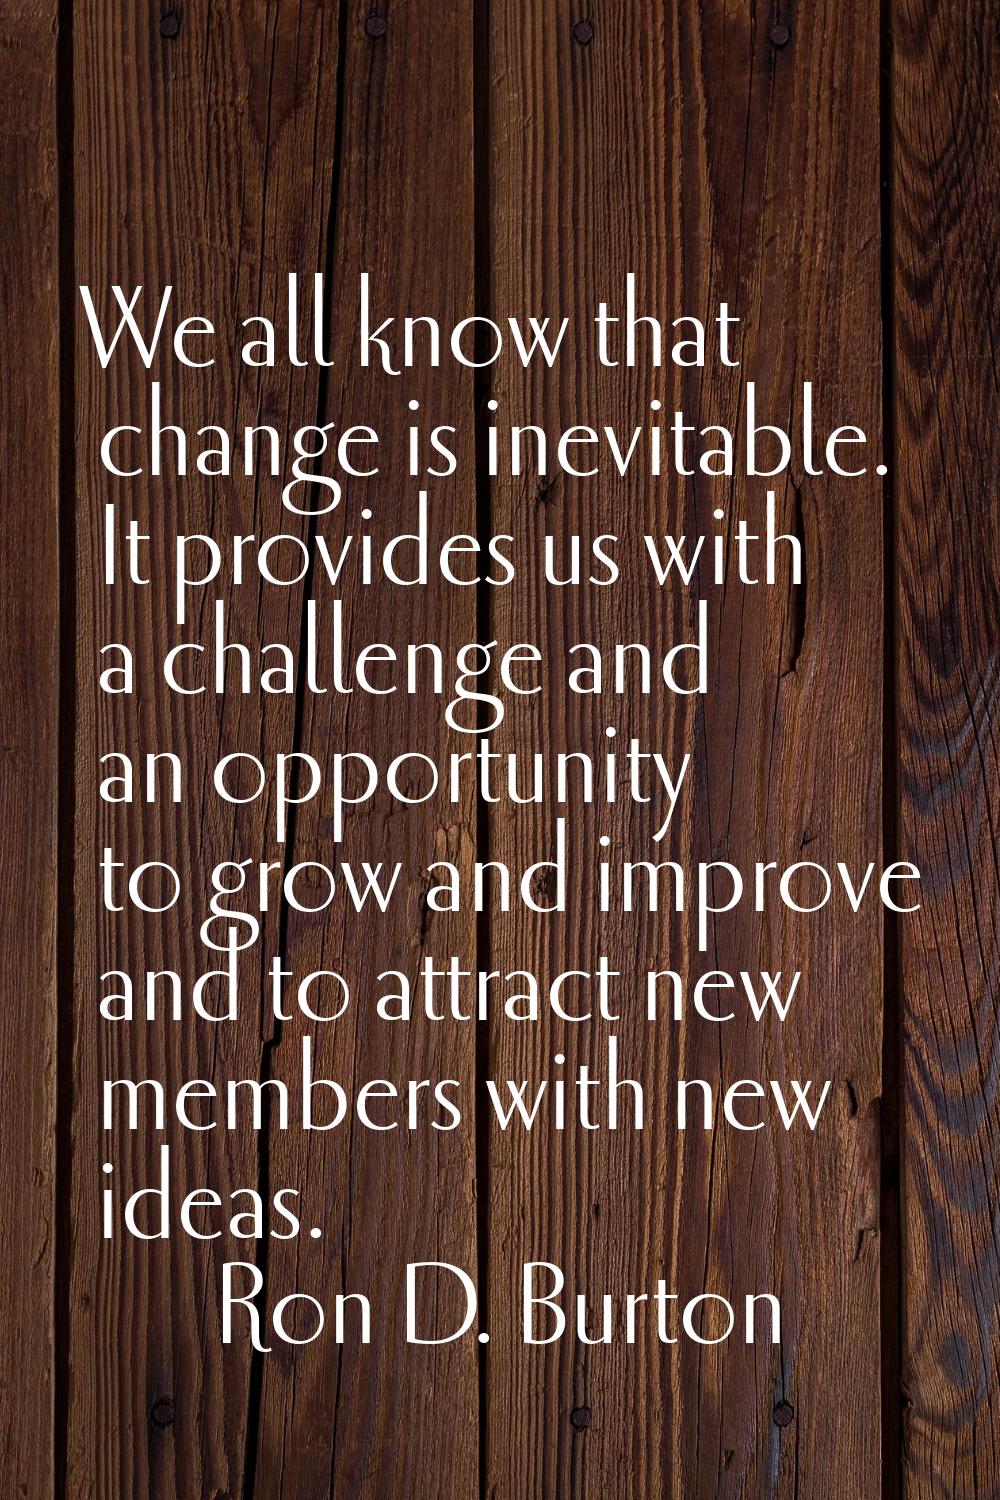 We all know that change is inevitable. It provides us with a challenge and an opportunity to grow a